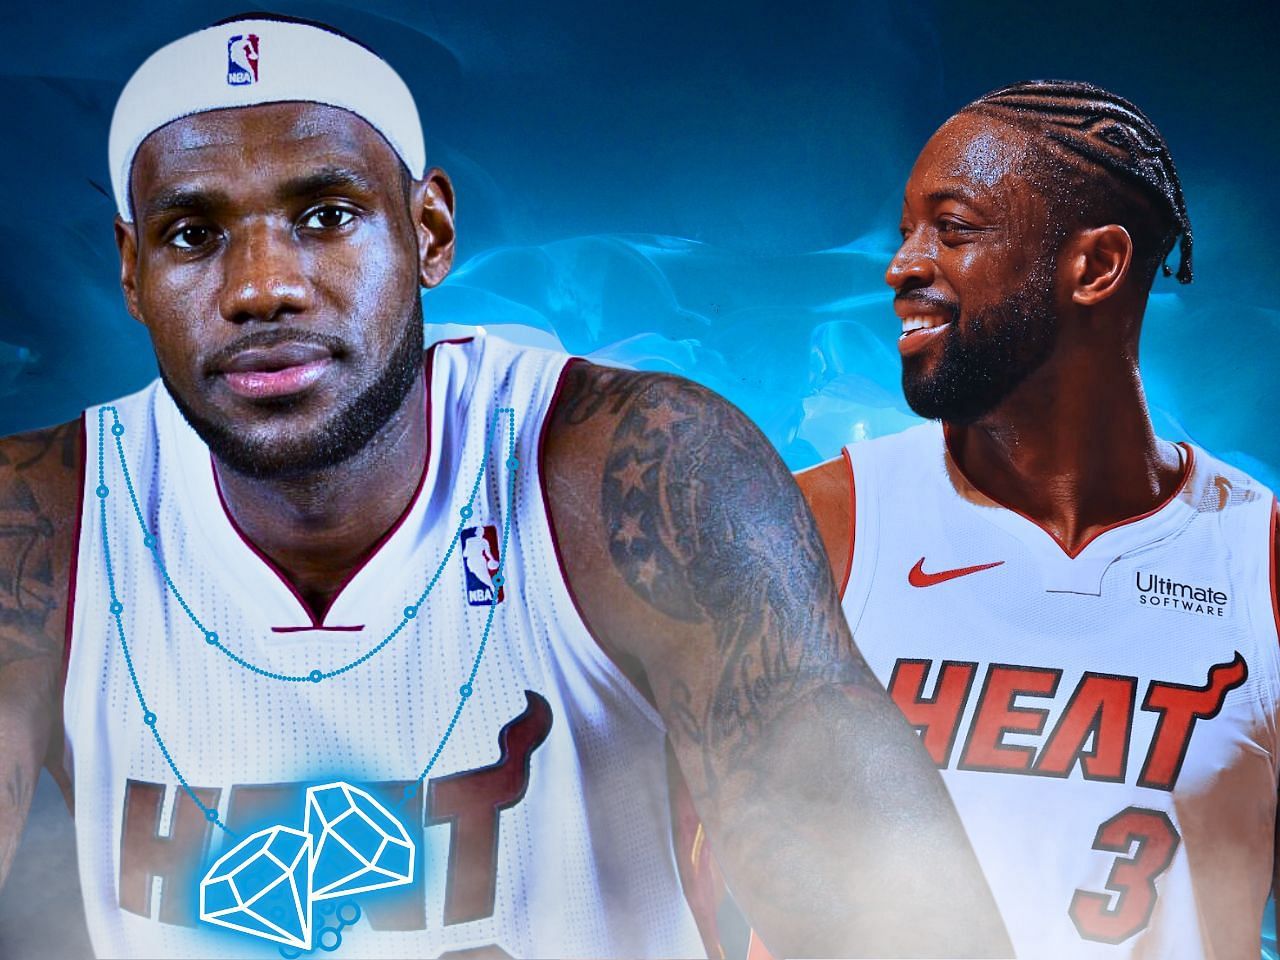 Dwyane Wade trolled LeBron James for his ice after a practice when they were on the Miami Heat.